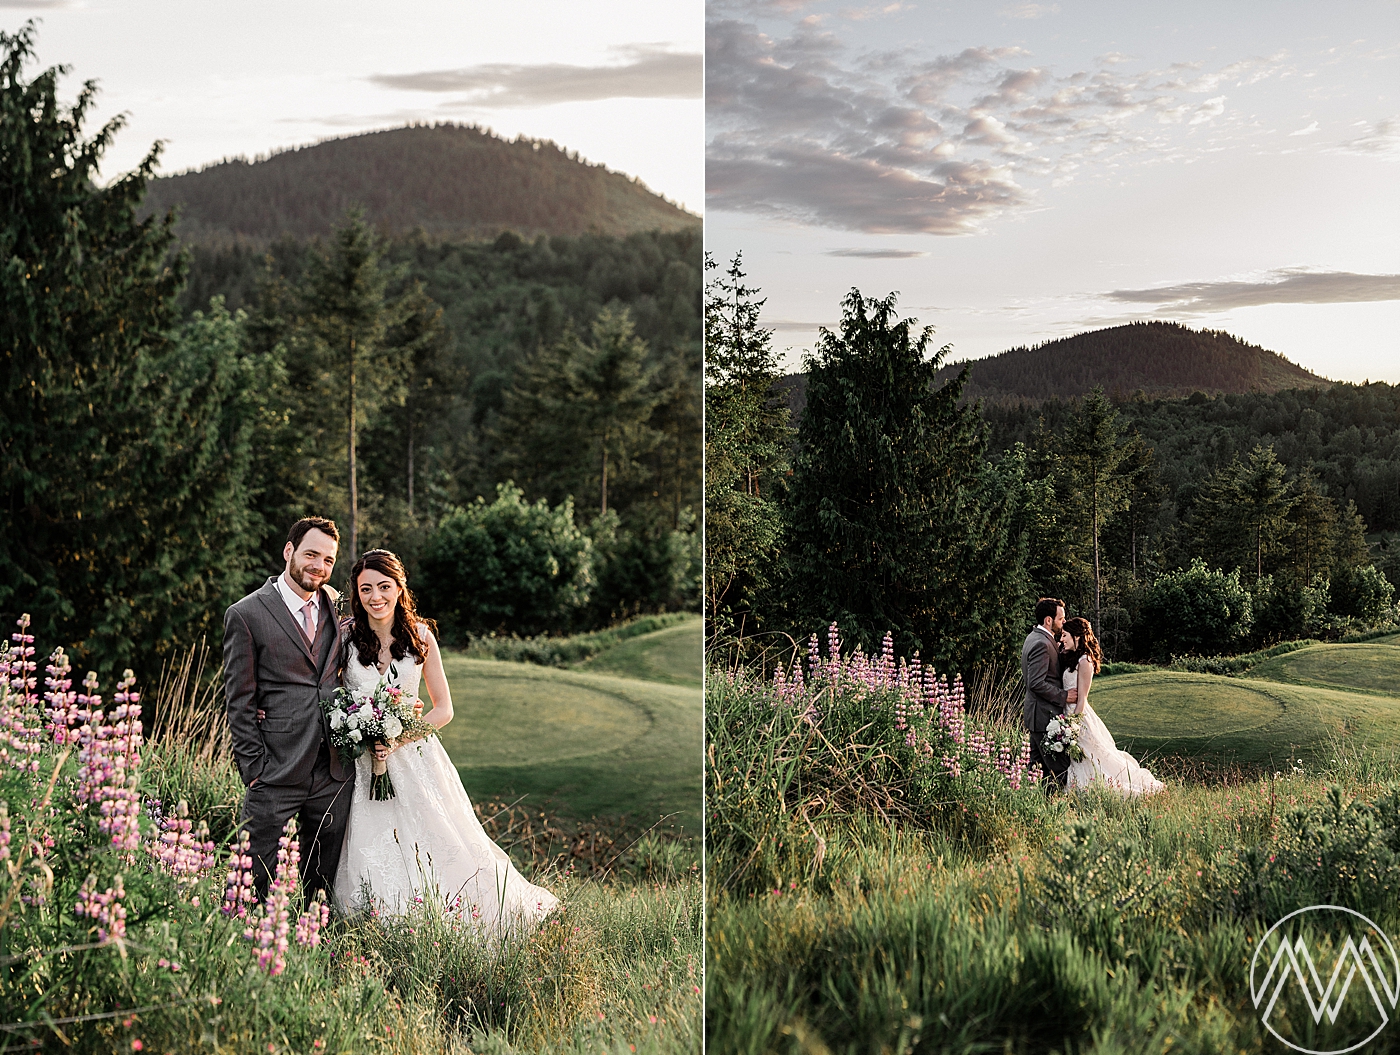 Sunset bride and groom portraits at Eaglemont Golf Course Wedding Venue | Photographed by PNW Wedding Photographer, Megan Montalvo Photography